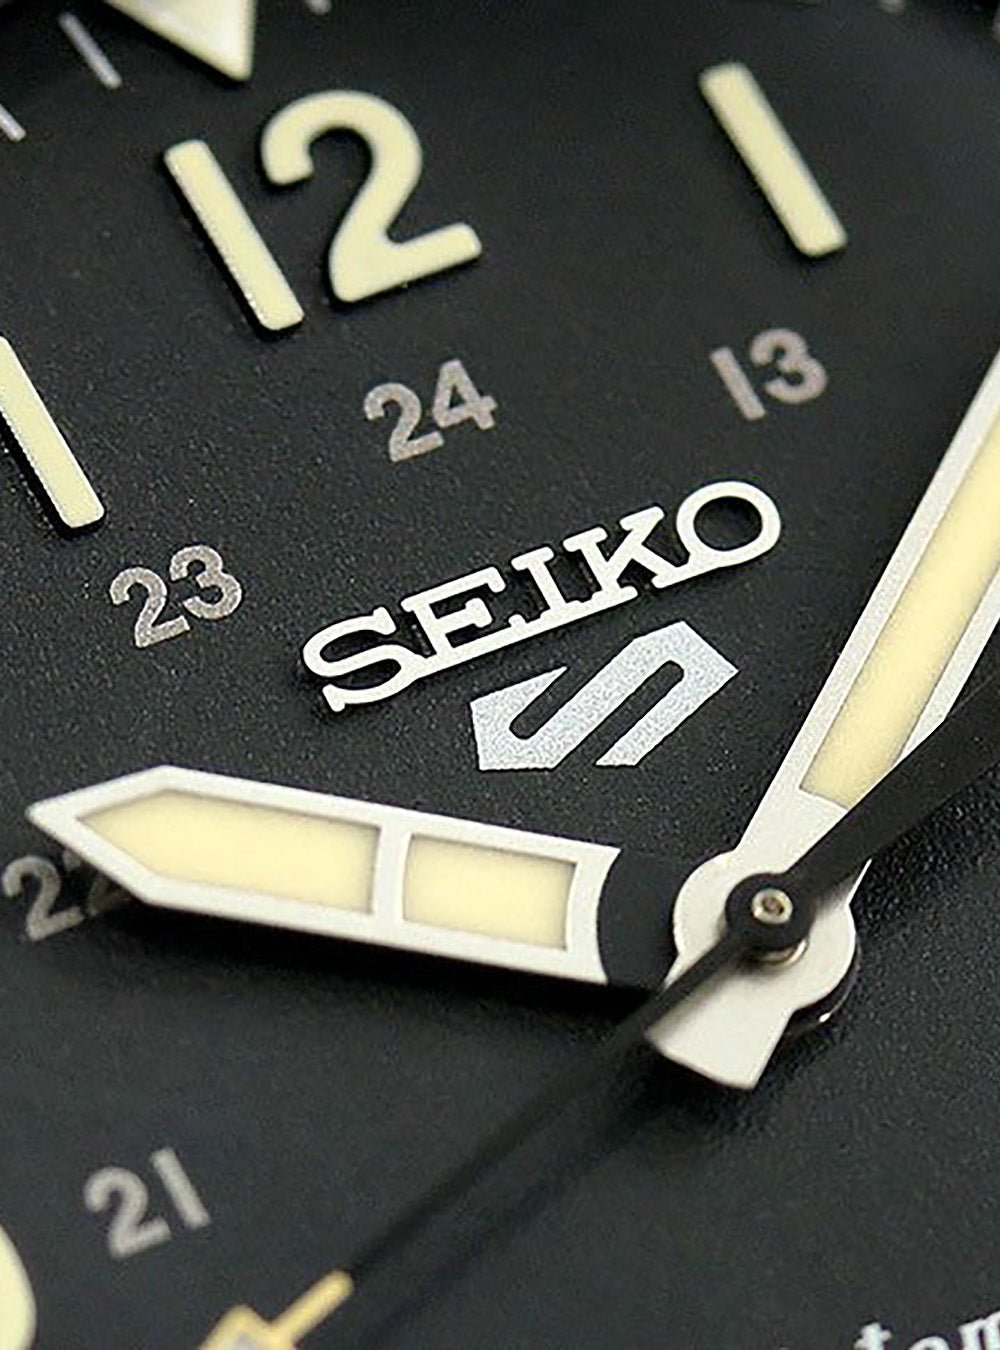 SEIKO 5 SPORTS AUTOMATIC MILITARY STYLE SBSA117 MADE IN JAPANWatchesjapan-select